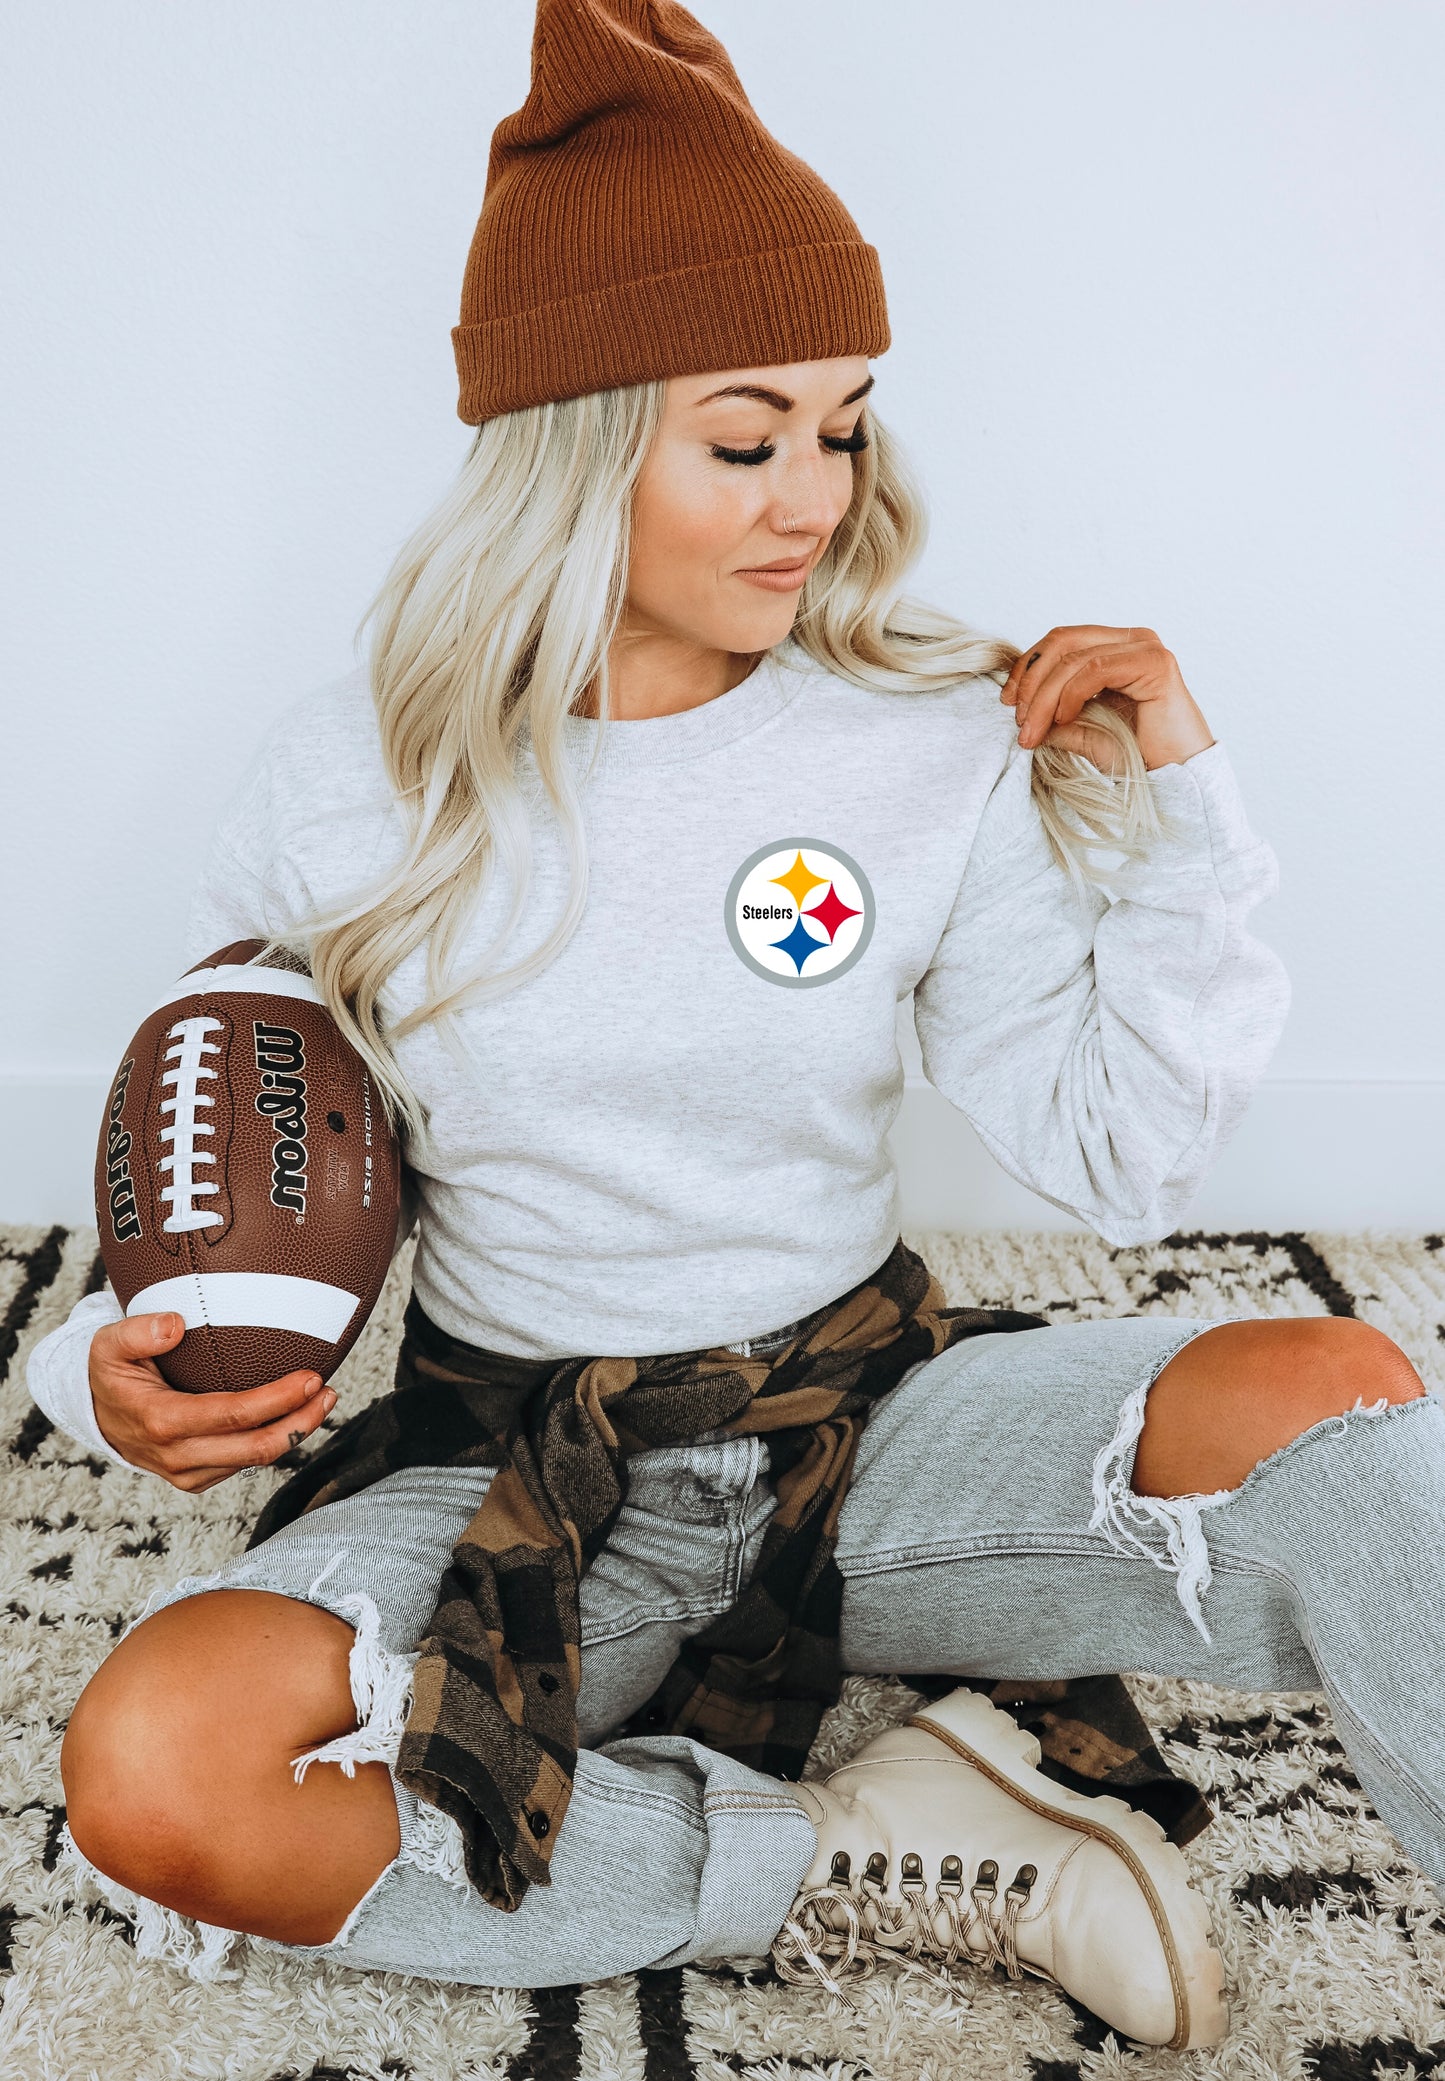 She’s A 10 (Steelers): *DTF* Transfer